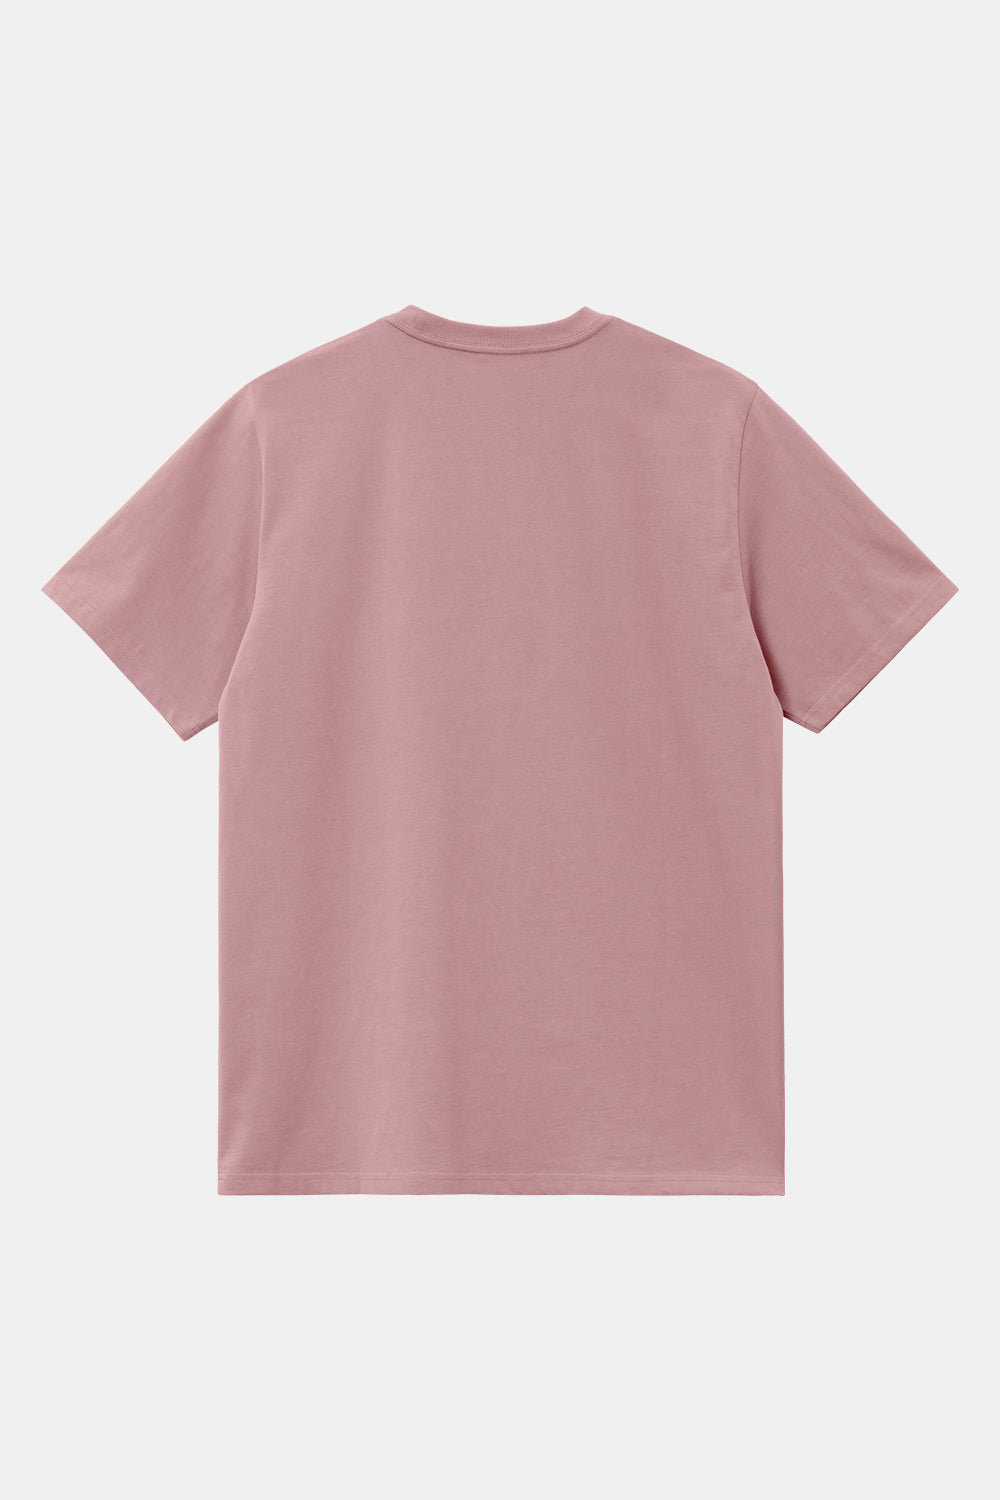 Carhartt WIP Short Sleeve Chase T-Shirt (Glassy Pink/Gold)